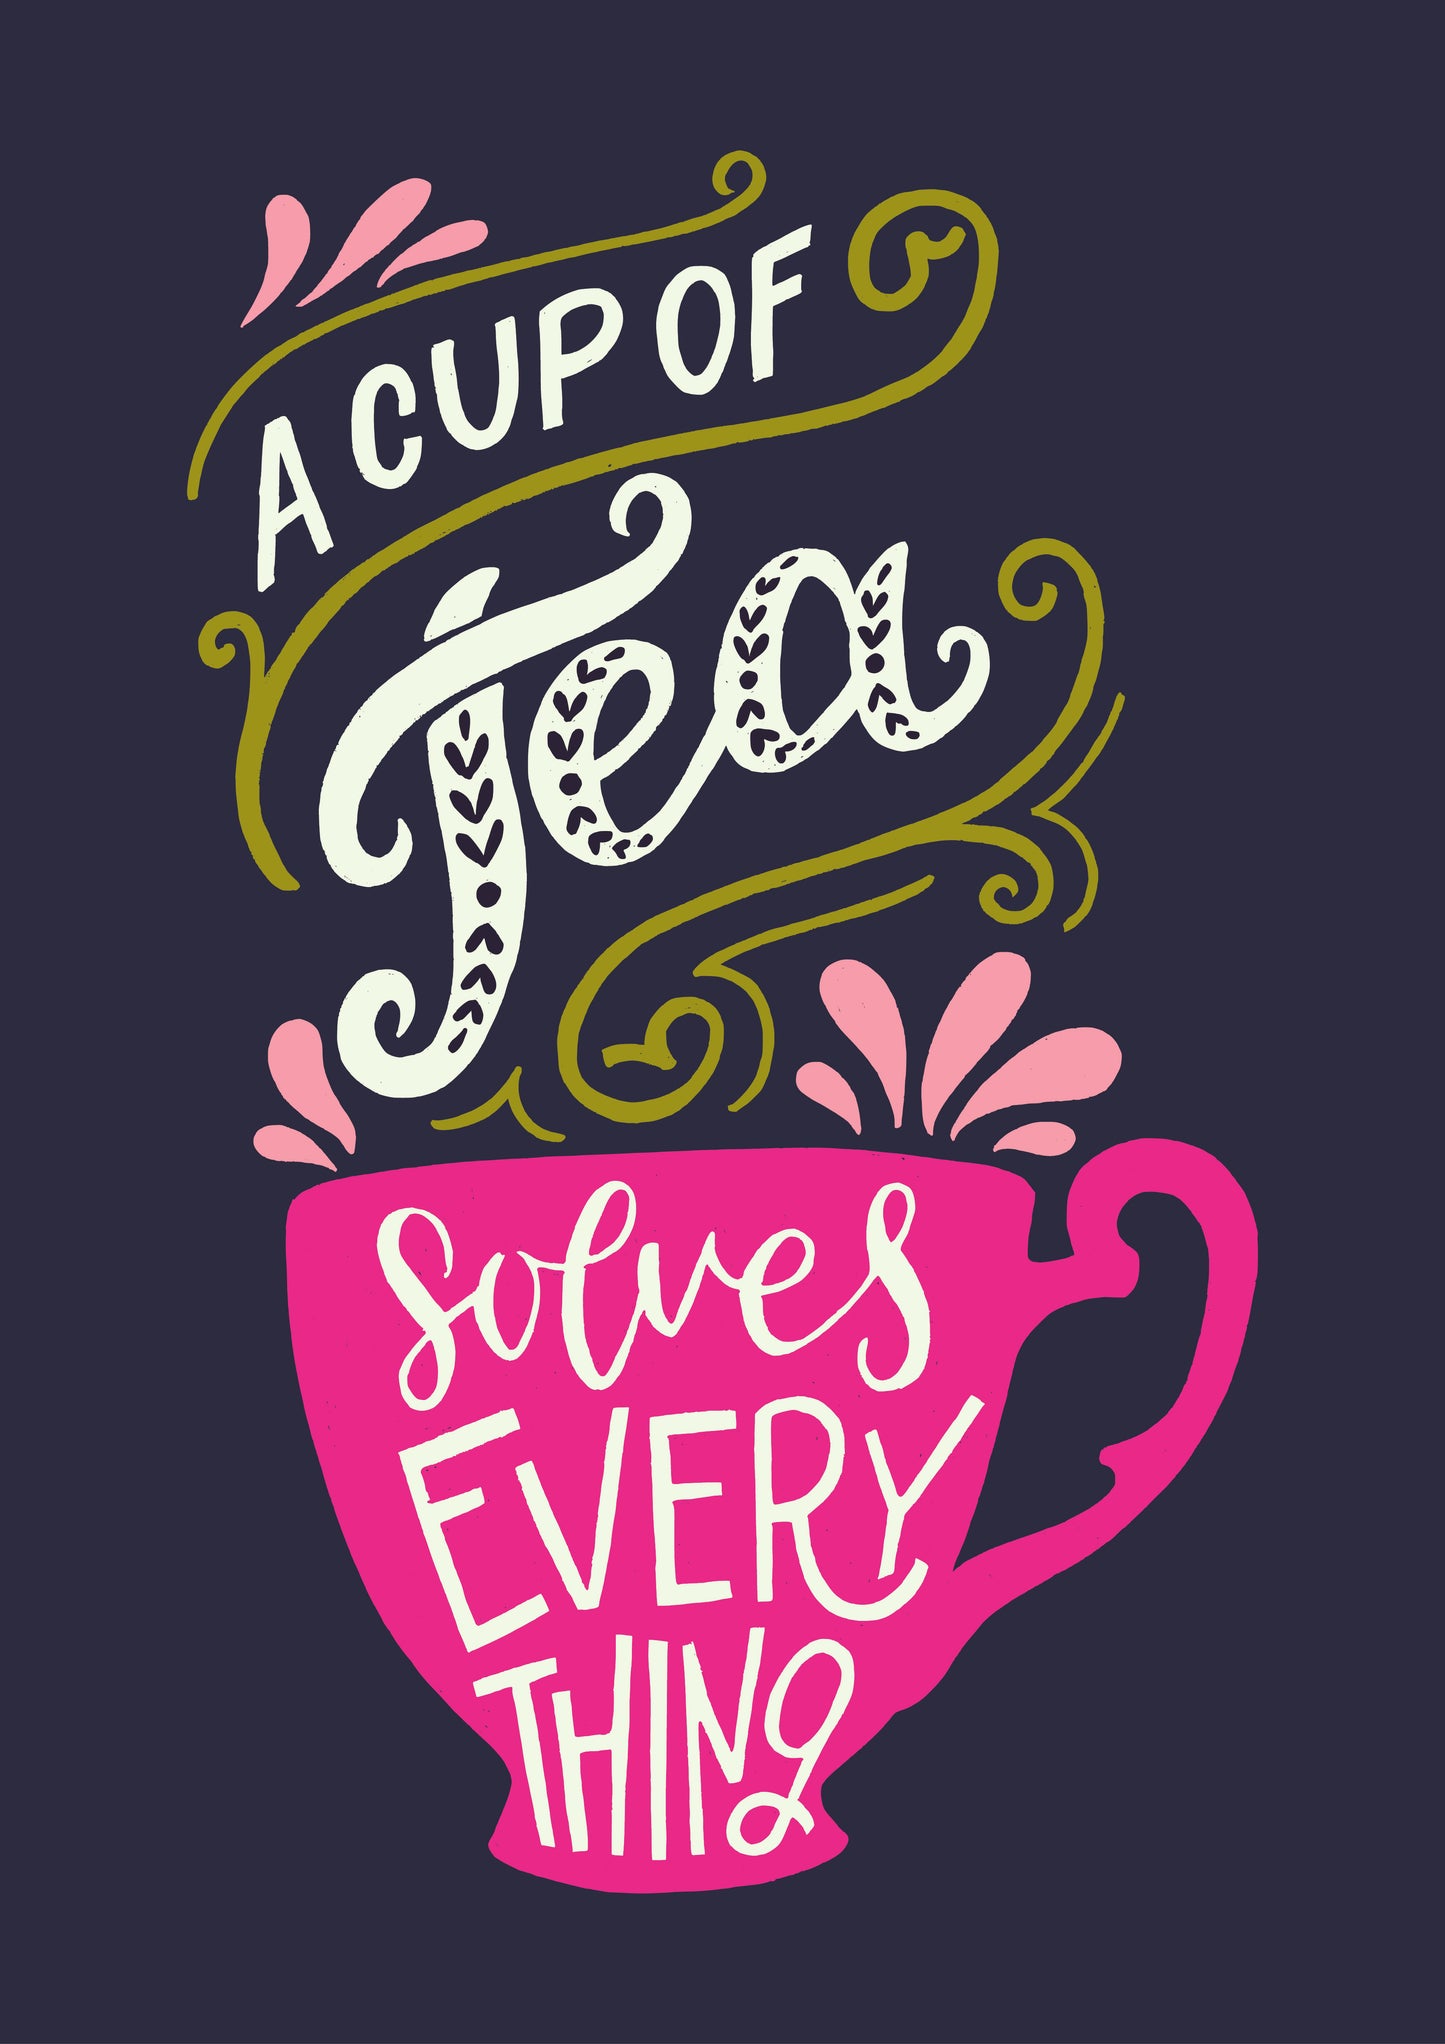 A cup of tea solves everything